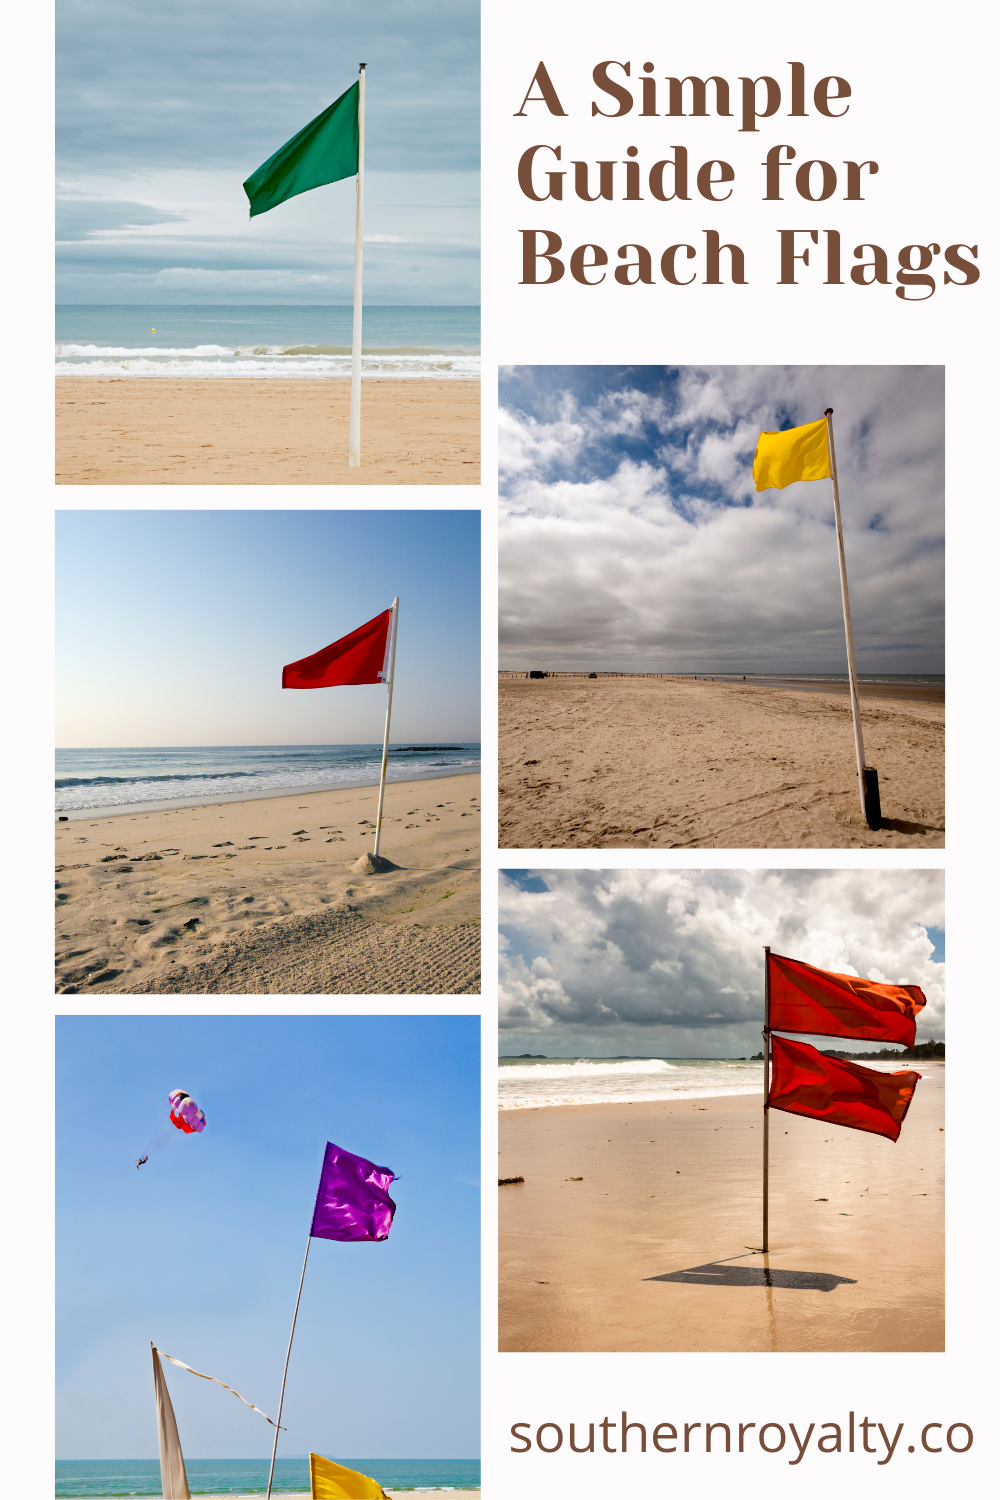 beach flag guide water safety swimming warnings beach warnings red flags yellow flag purple flag